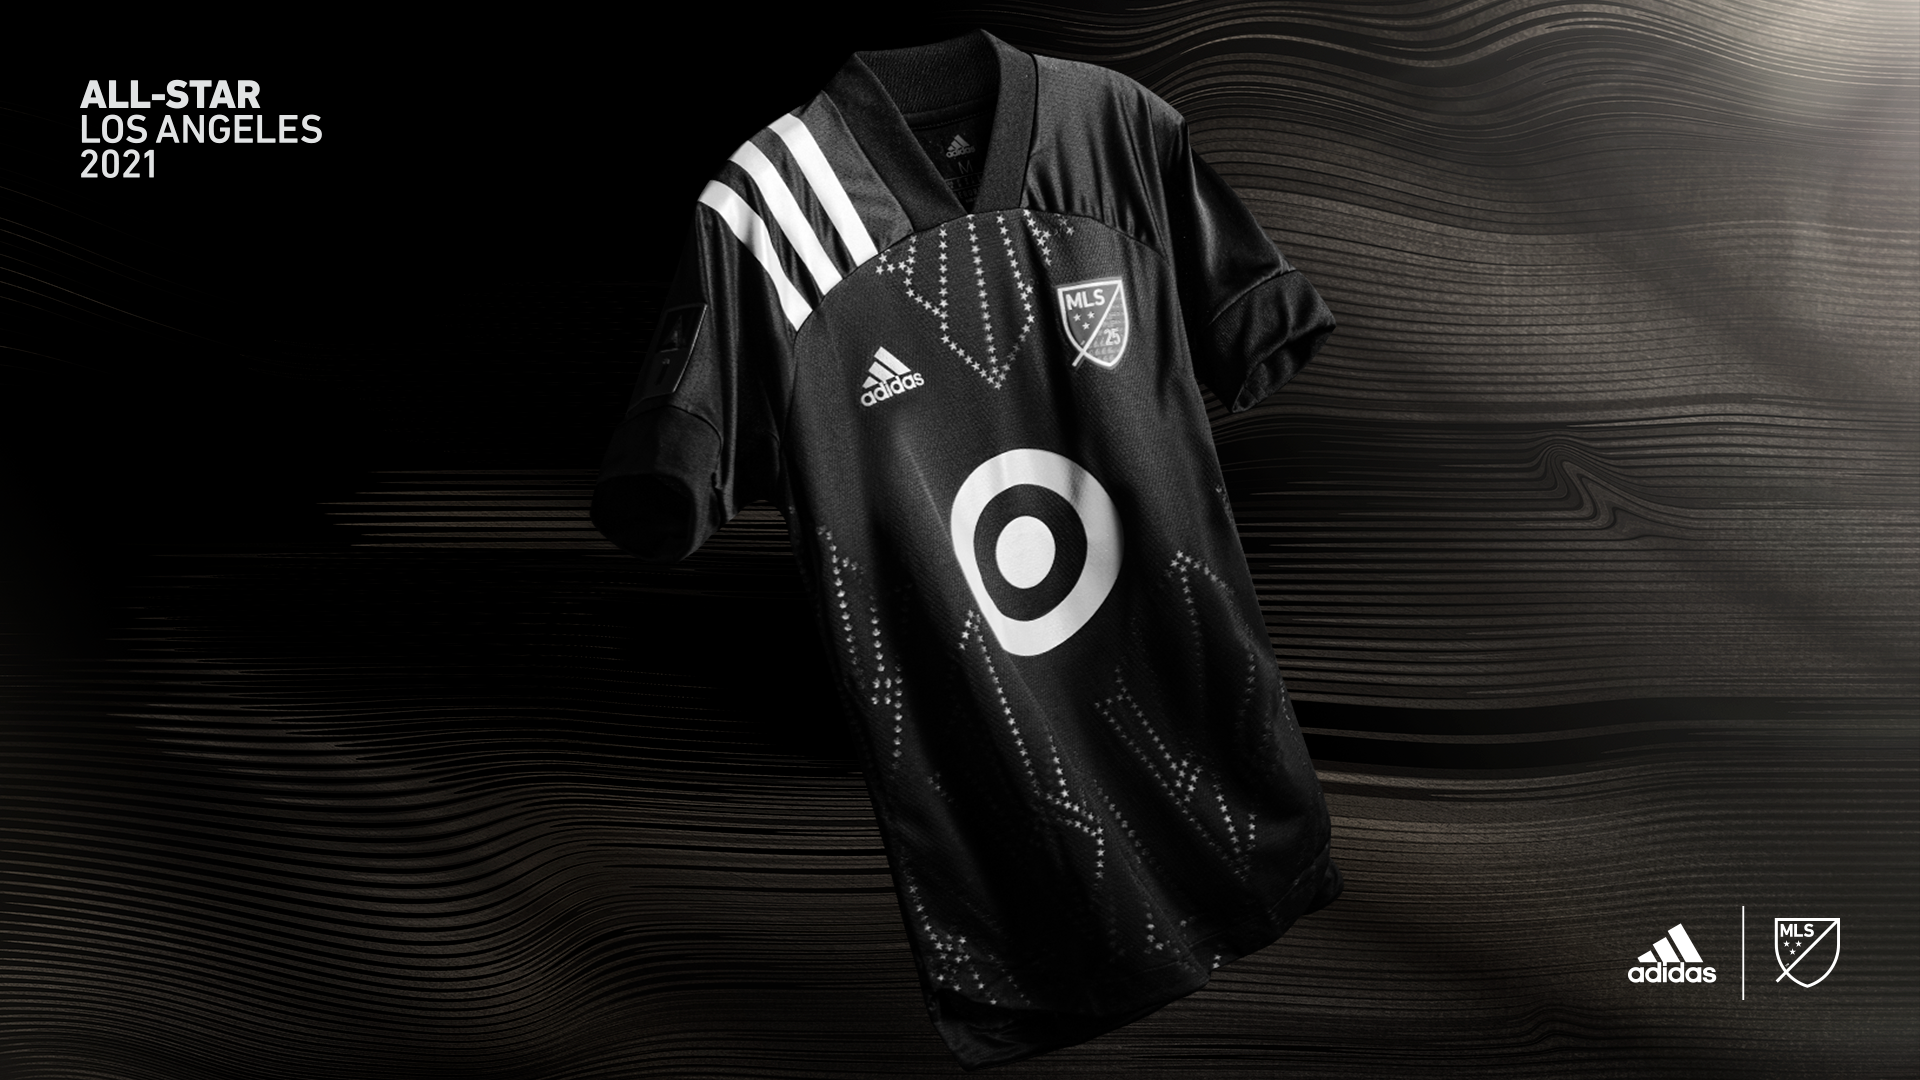 Major League Soccer and Adidas unveil the new kit for the 2021 MLS All-Star  Game – THE PEACH REVIEW®